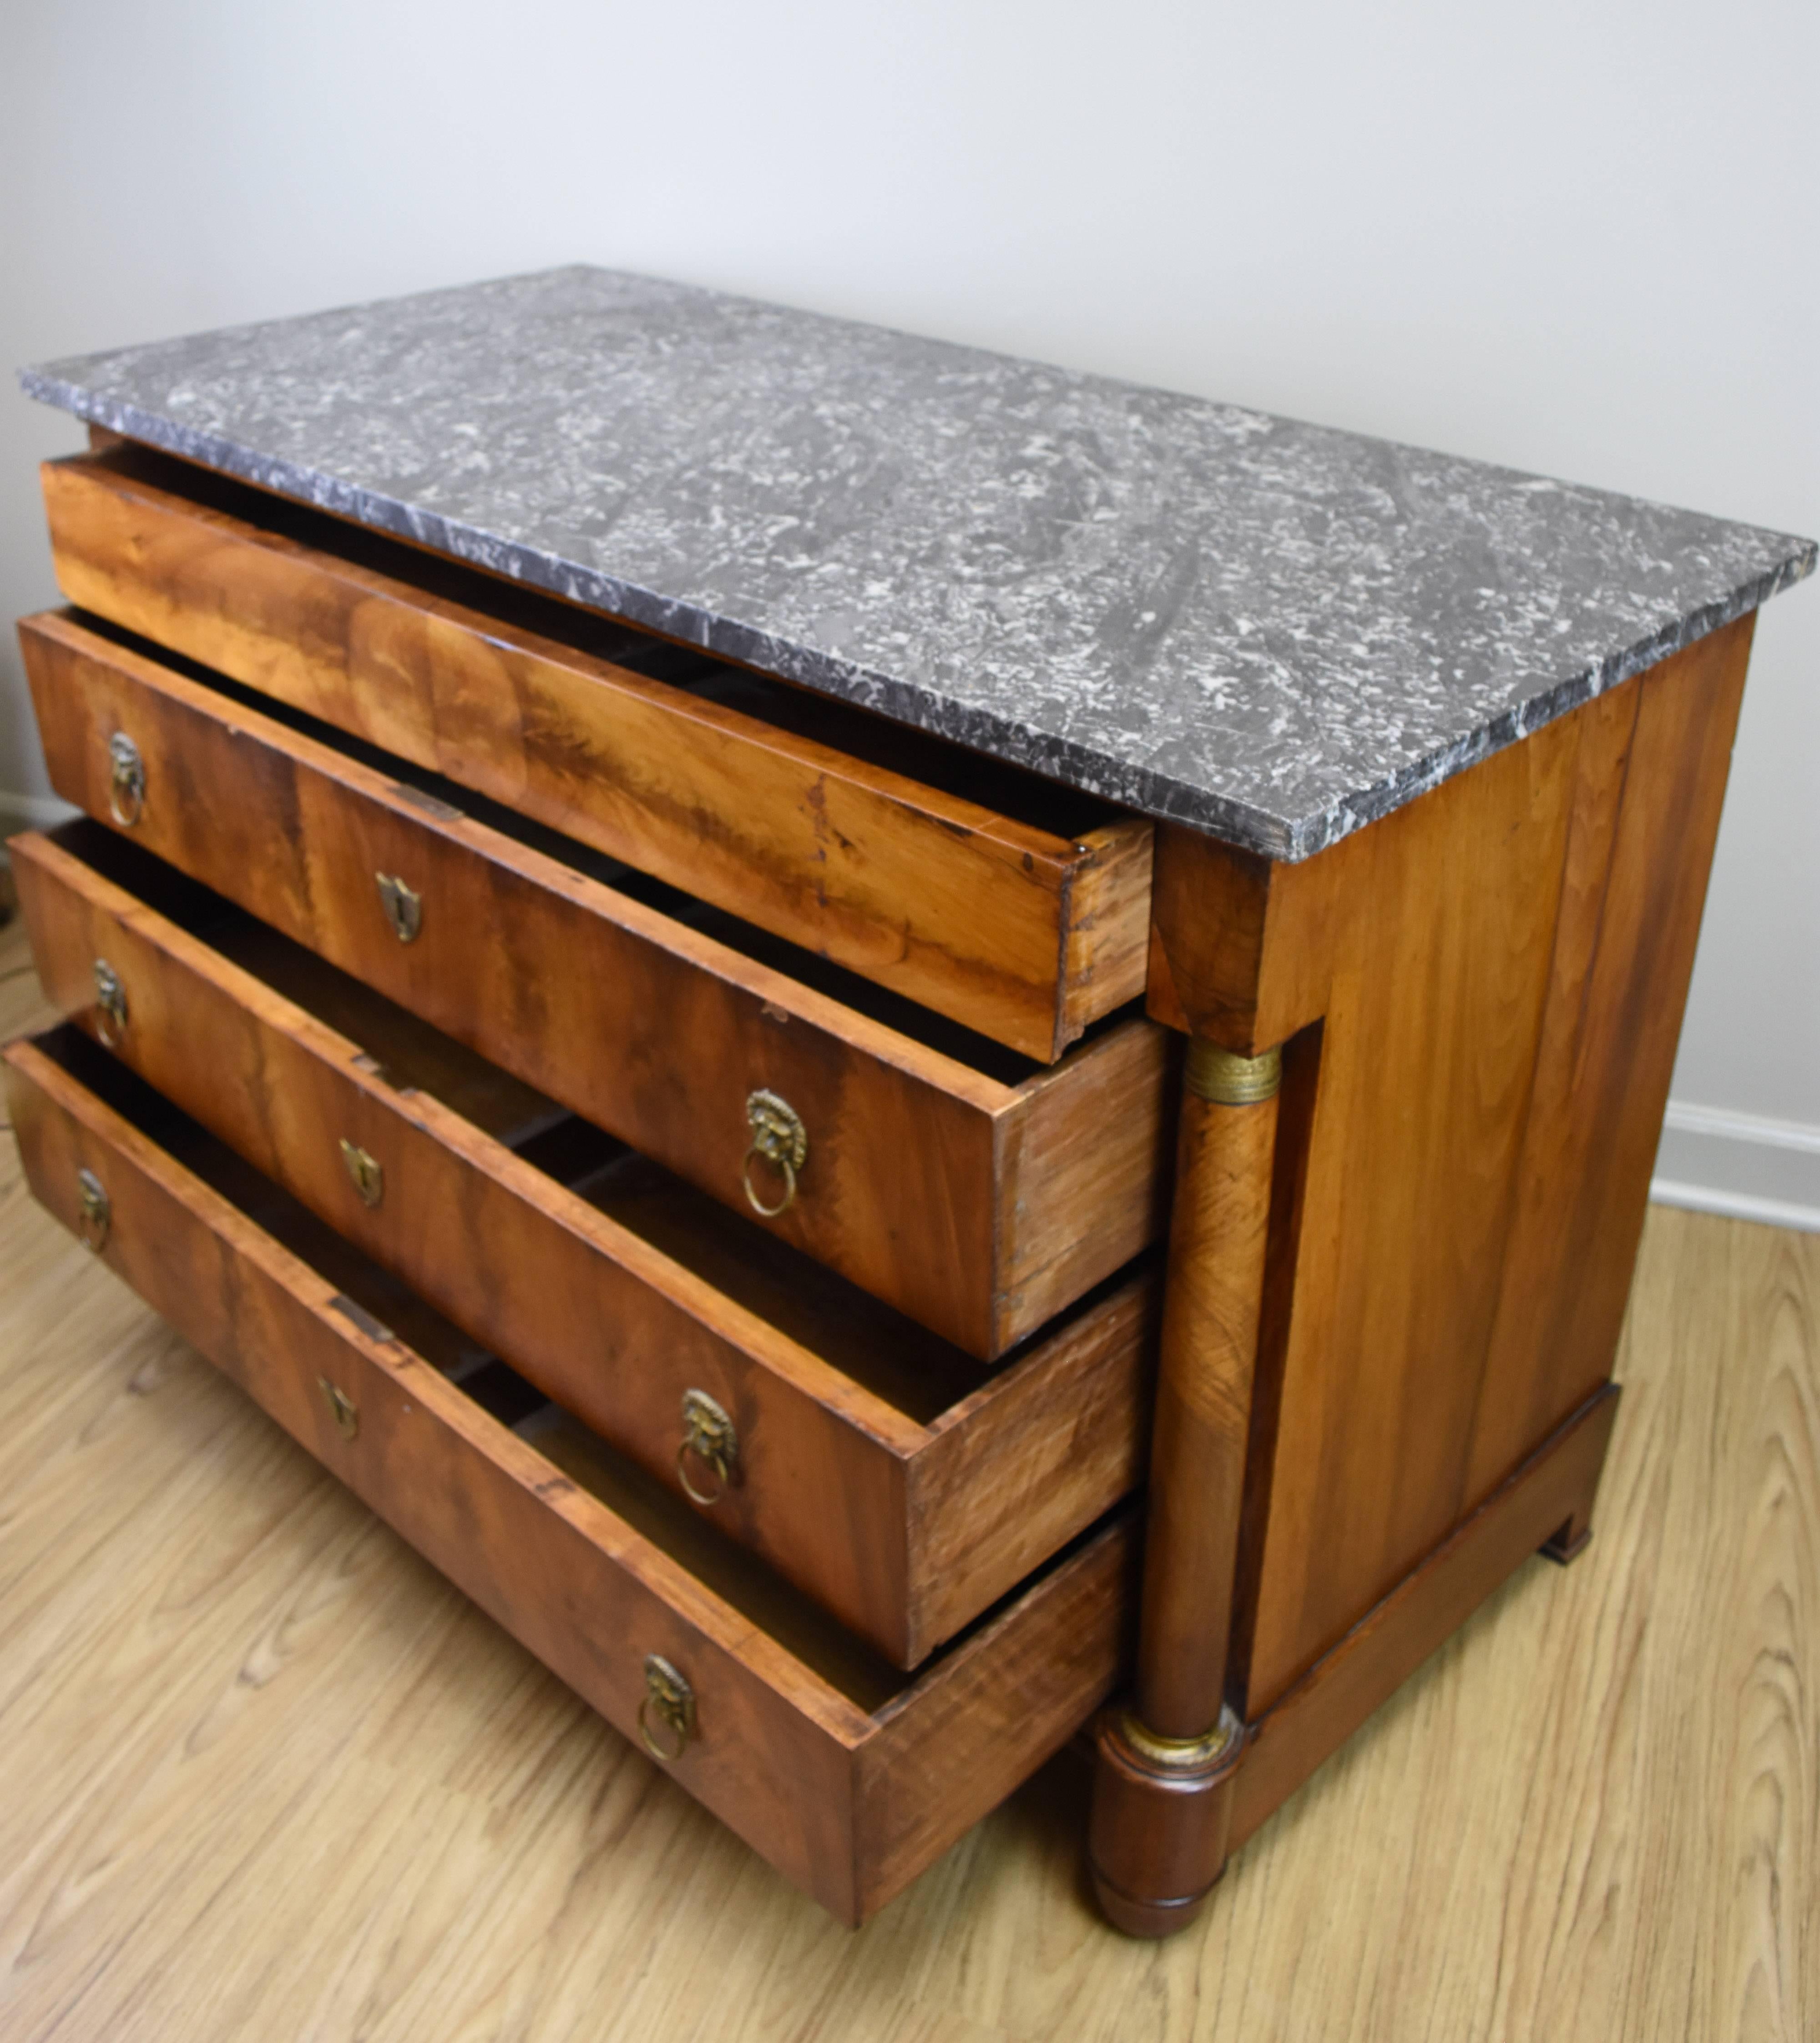 This French walnut Empire commode features a charcoal gray marble top and four functional drawers. The walnut veneer on the front is bookmatched and has a wonderful rich patina. Three of the drawers have pulls featuring a lions head motif and the